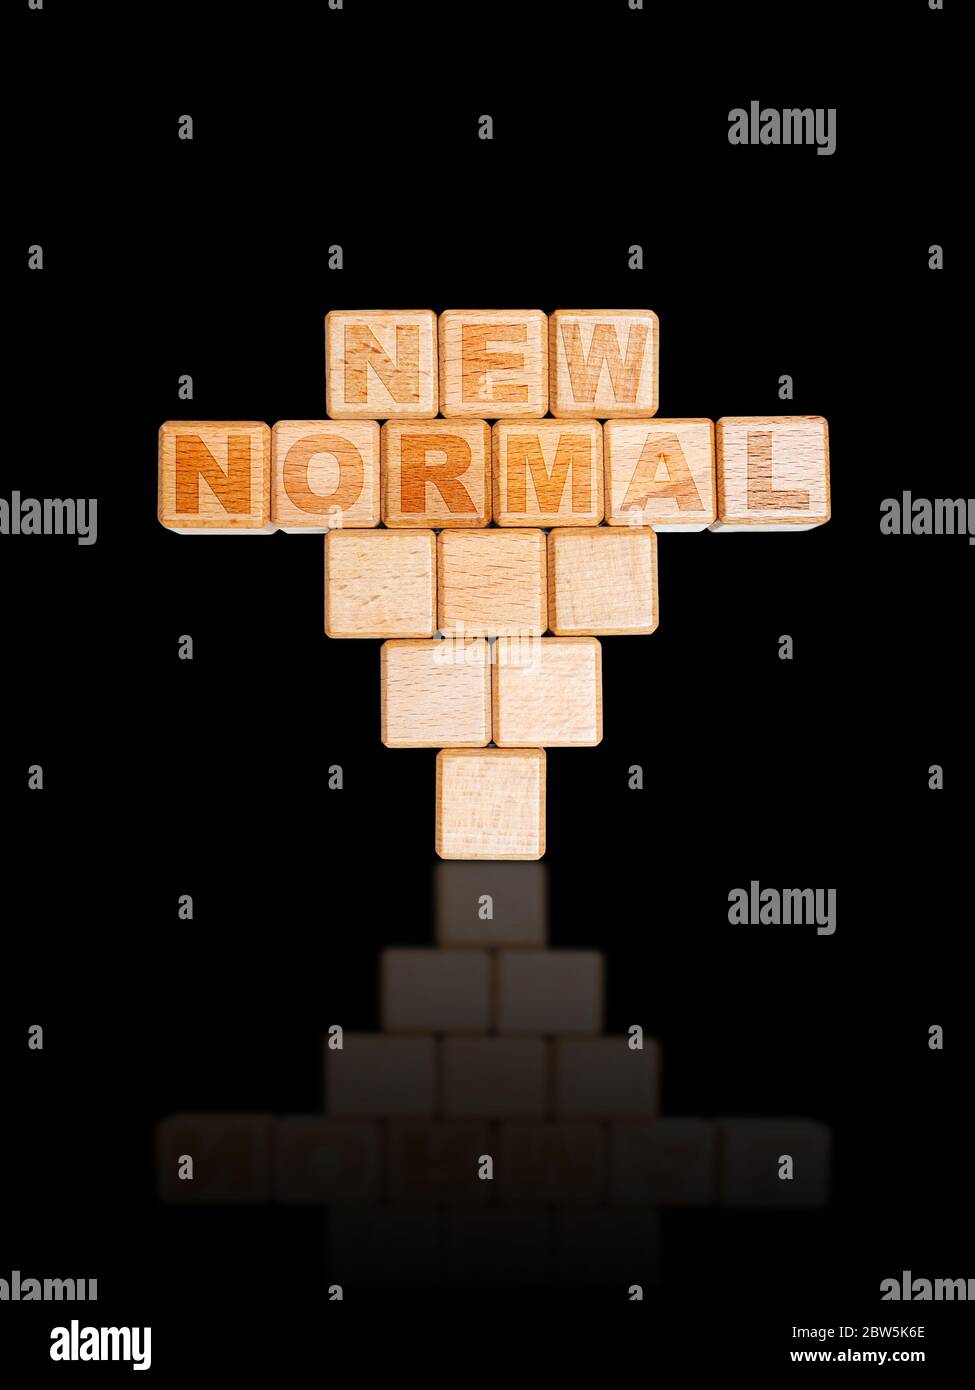 NEW NORMAL word on engraved wooden alphabet cube blocks inverted in abnormal stack. Concept of new normal lifestyle after COVID-19 coronavirus pandemi Stock Photo